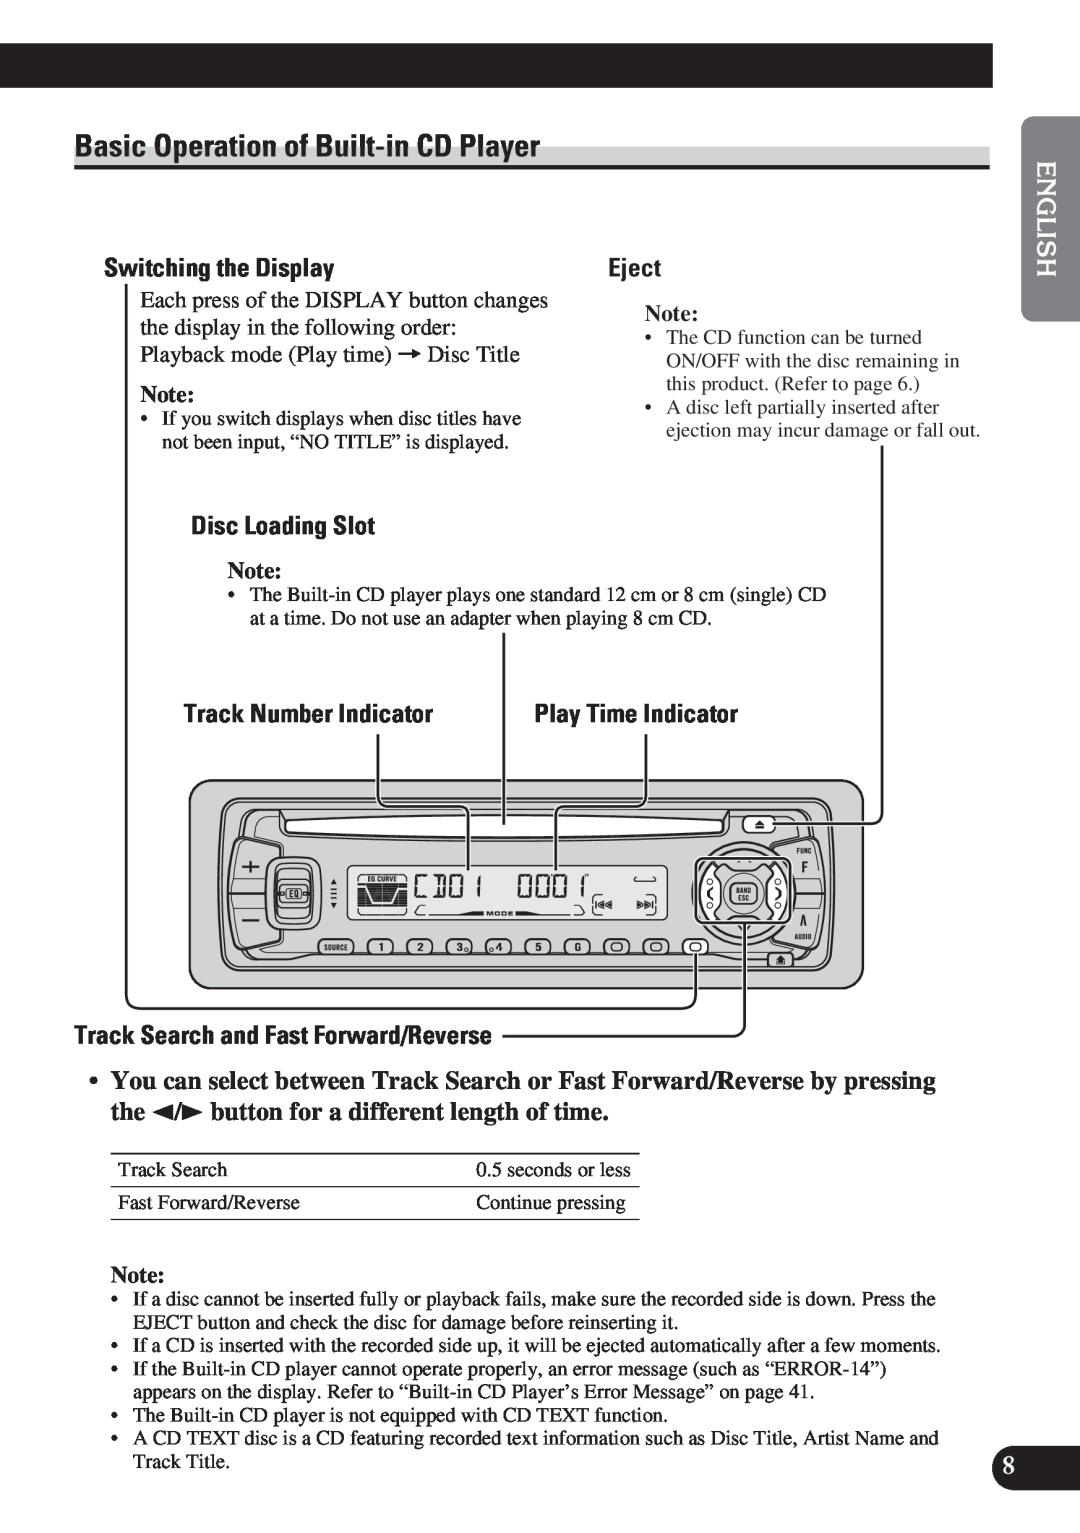 Pioneer DEH-P4150 Basic Operation of Built-inCD Player, Switching the Display, Eject, English Español, Disc Loading Slot 